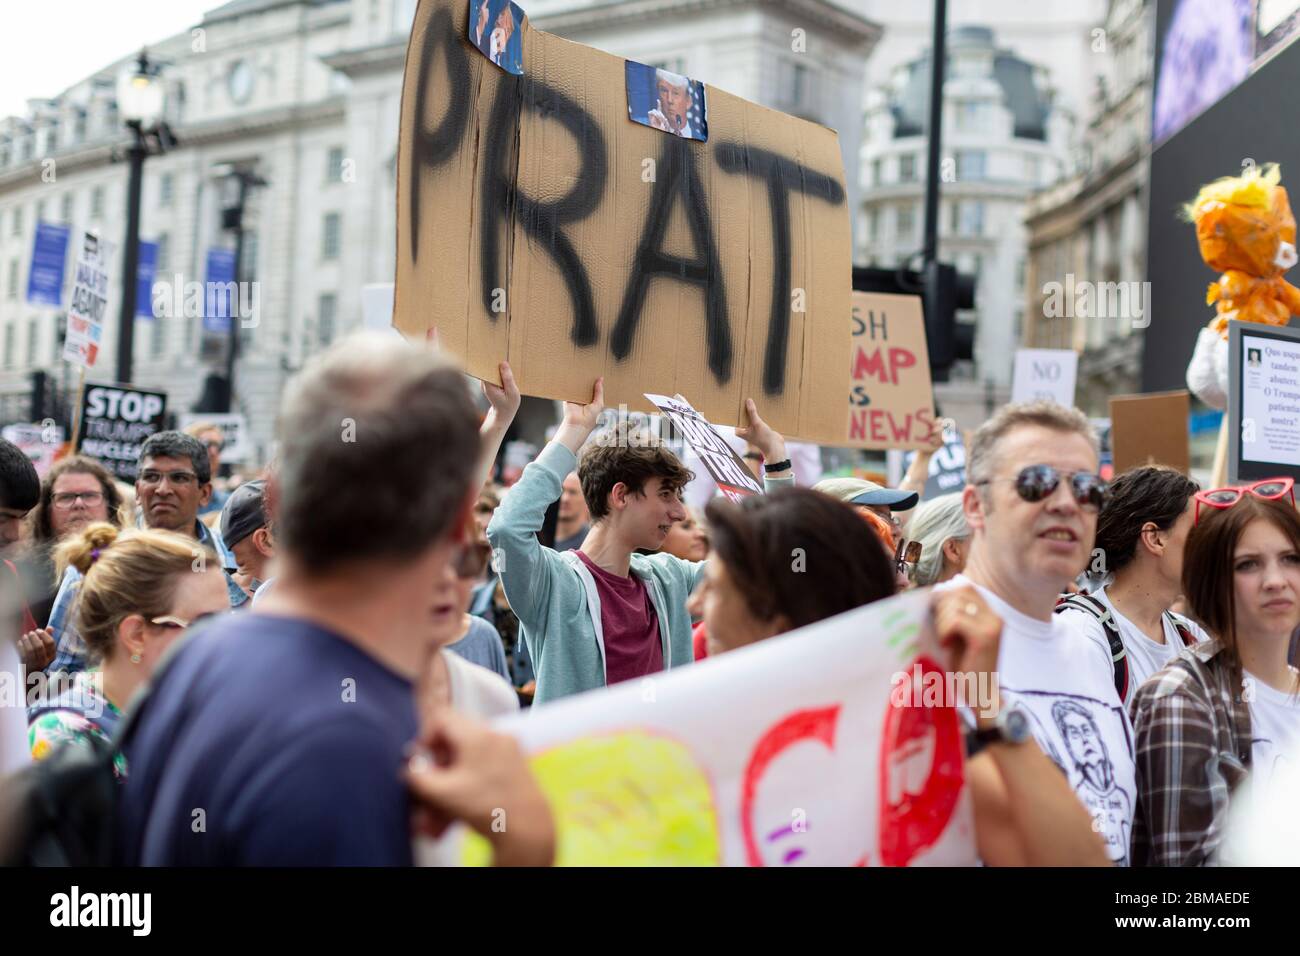 A young man holding up a sign reading 'Prat', at the protest and demonstration against Donald Trump's visit to London, 13 July 2018 Stock Photo